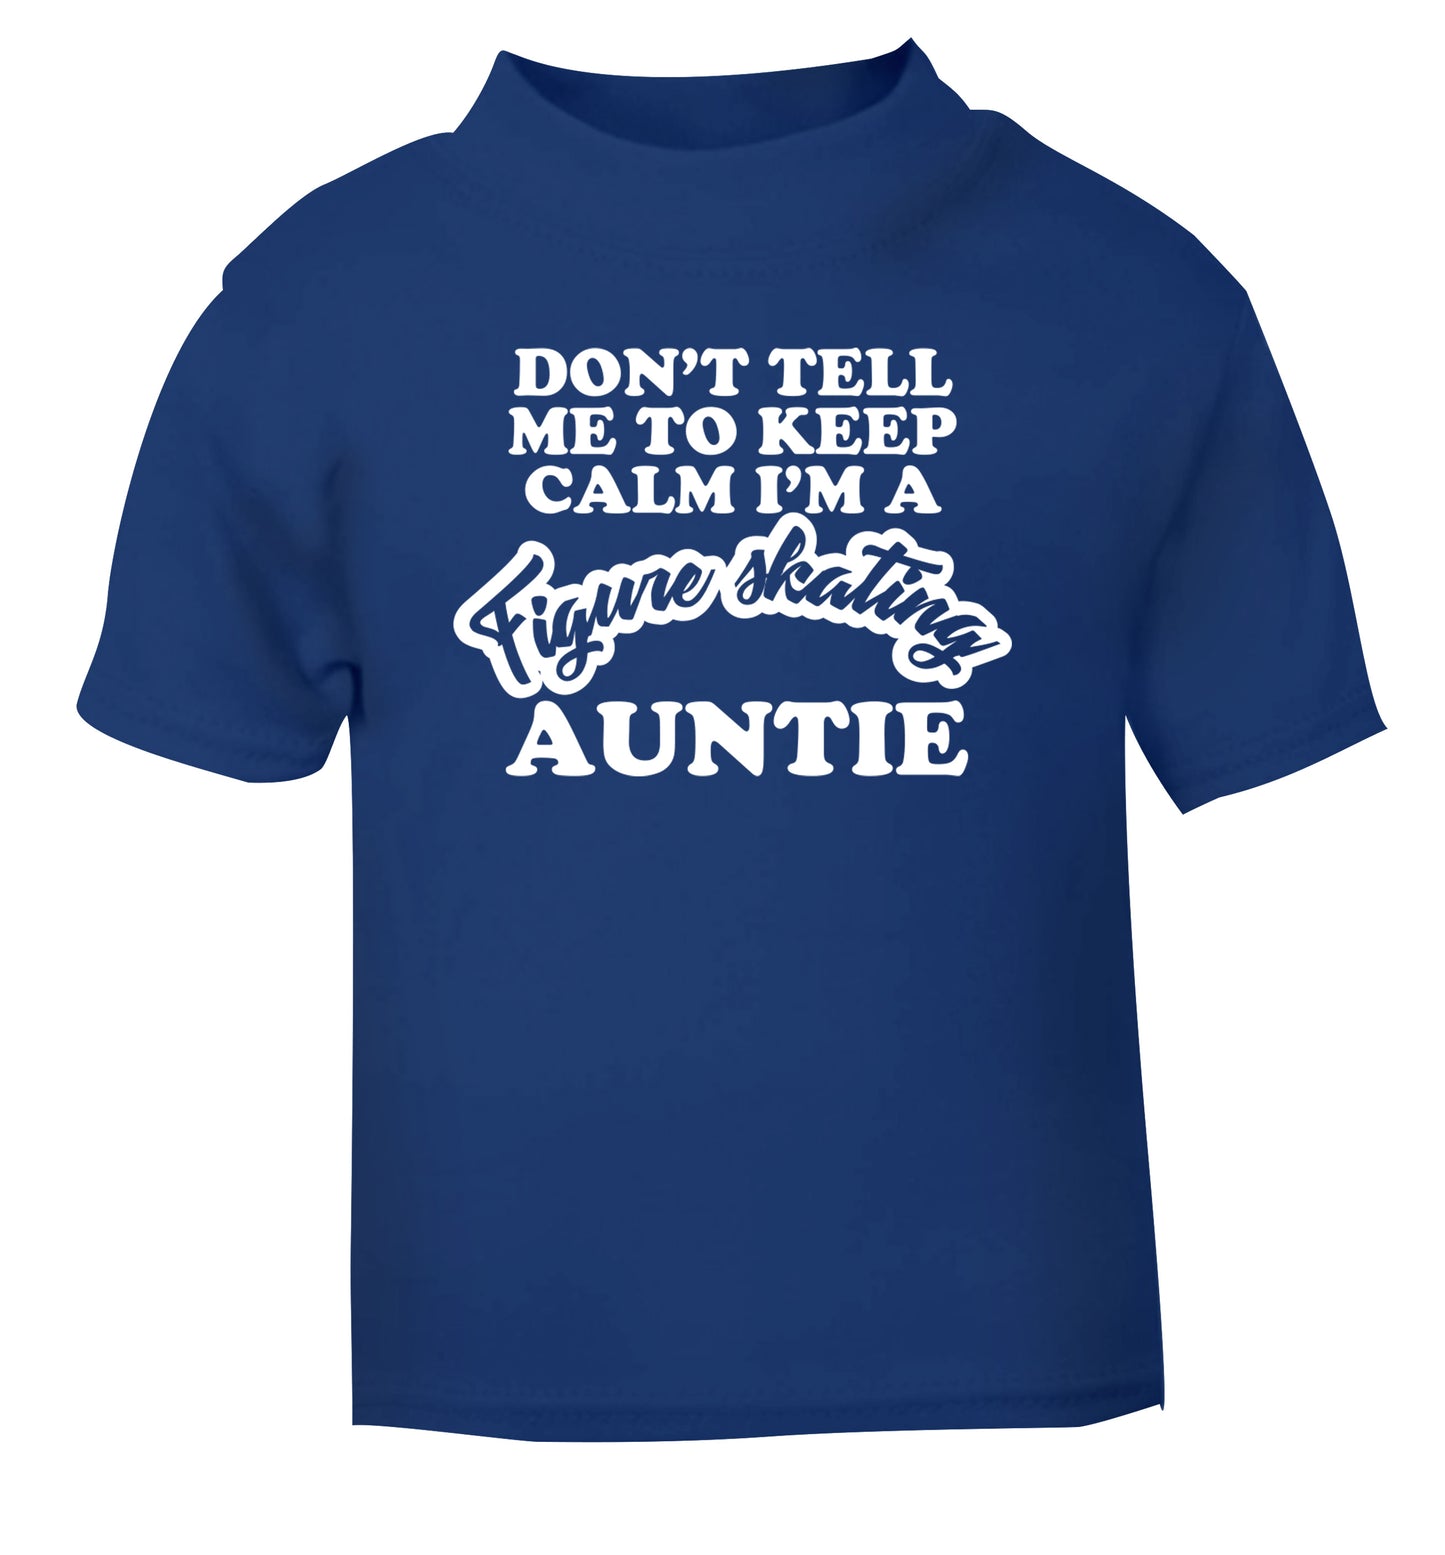 Don't tell me to keep calm I'm a figure skating auntie blue Baby Toddler Tshirt 2 Years